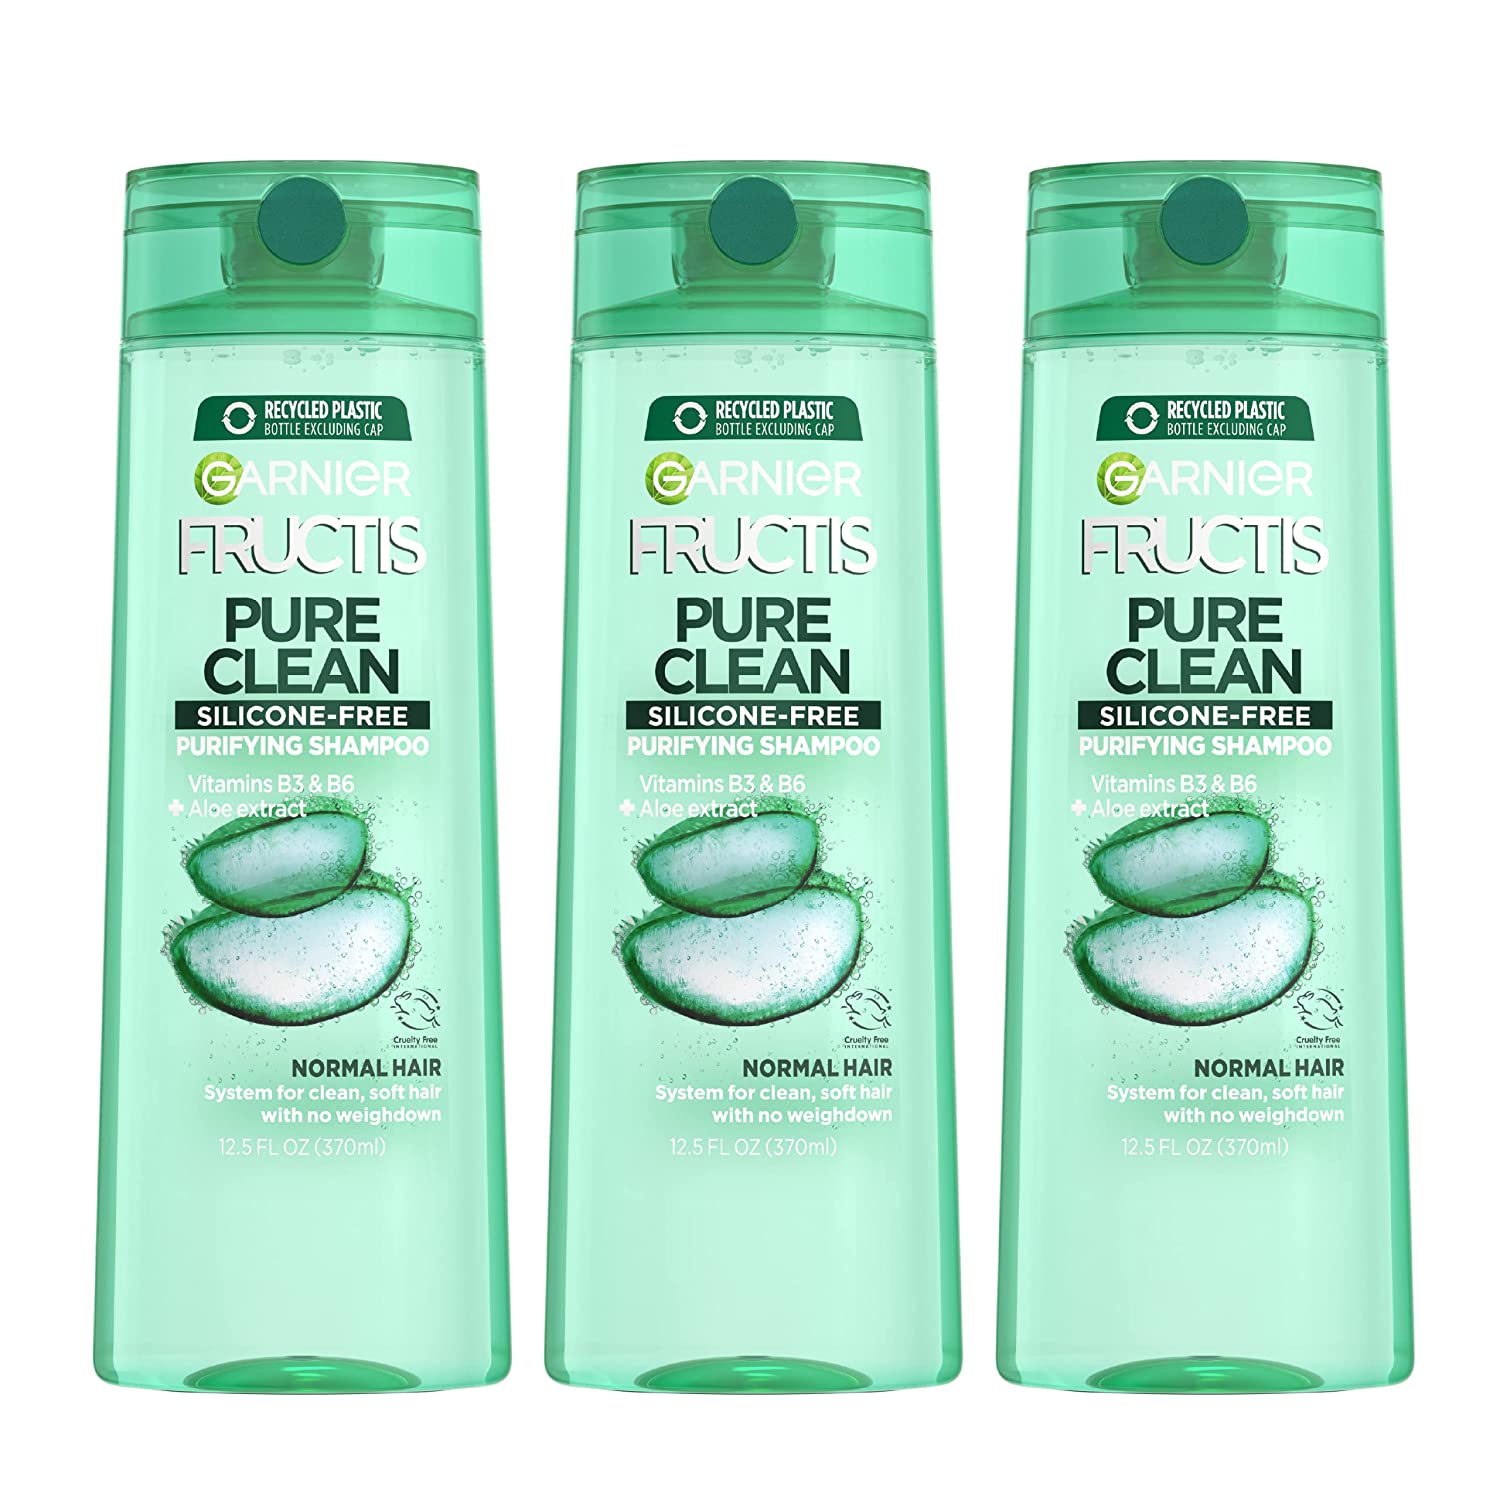 3-Count 12.5-Oz Garnier Hair Care Fructis Pure Clean Shampoo (Aloe Vera) $4.48 w/ S&S + Free Shipping w/ Prime or on orders over $25